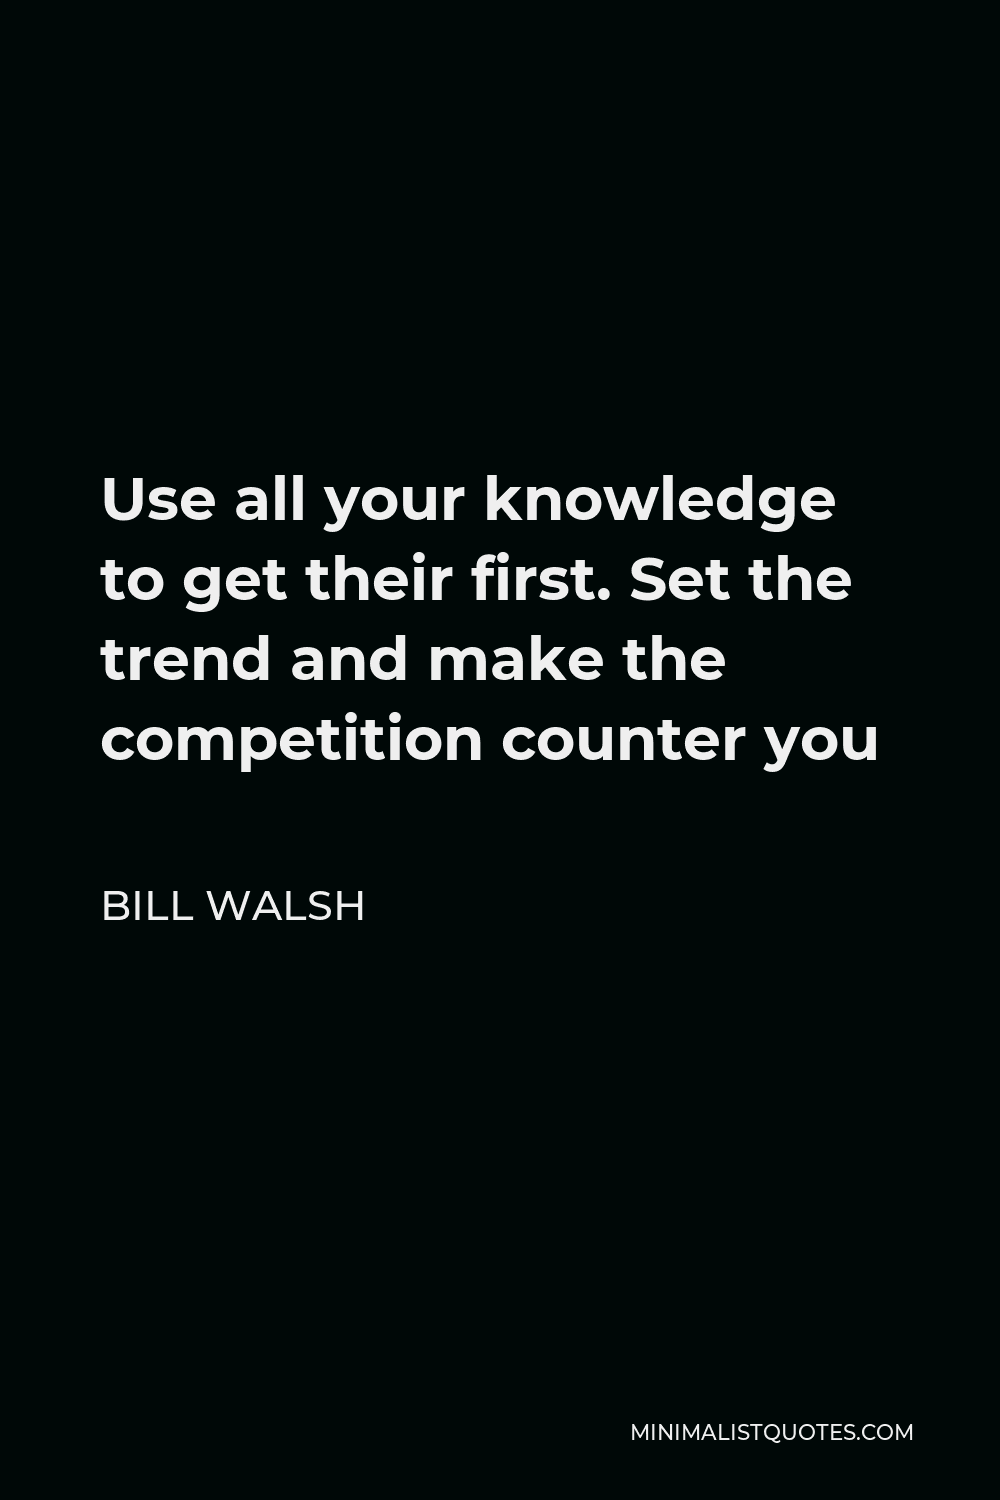 Bill Walsh Quote - Use all your knowledge to get their first. Set the trend and make the competition counter you